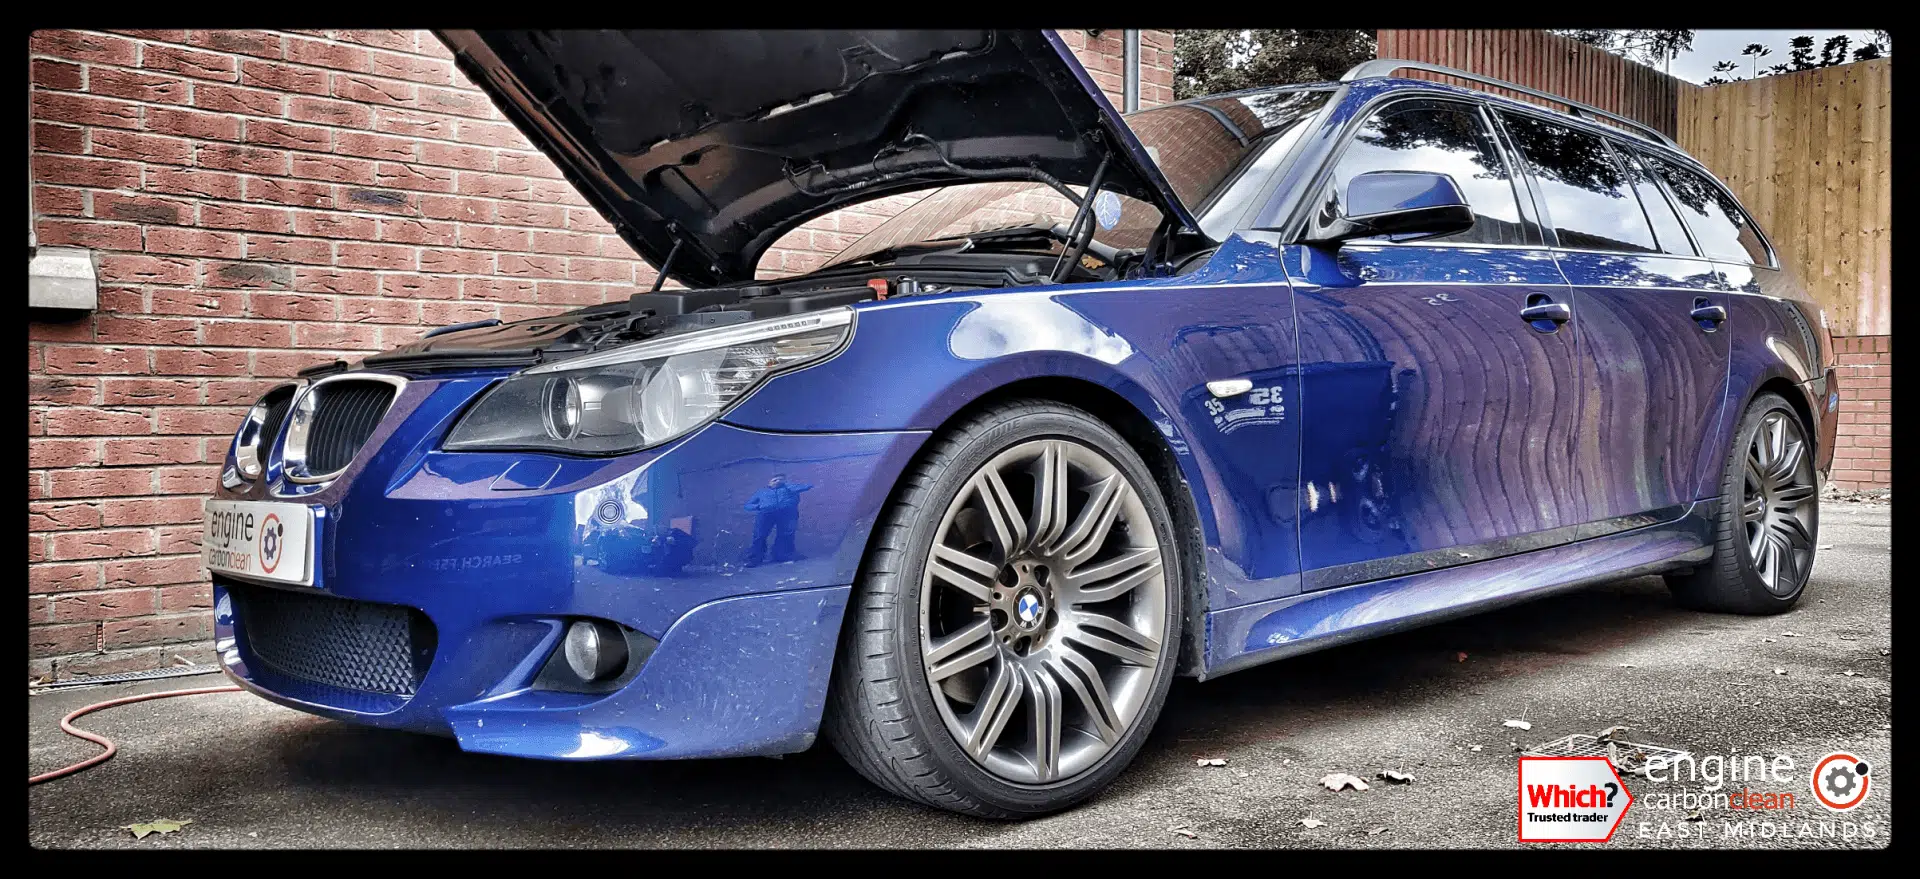 Diagnostic Consultation and Engine Carbon Clean on a BMW 520d (2010 - 122,805 miles)